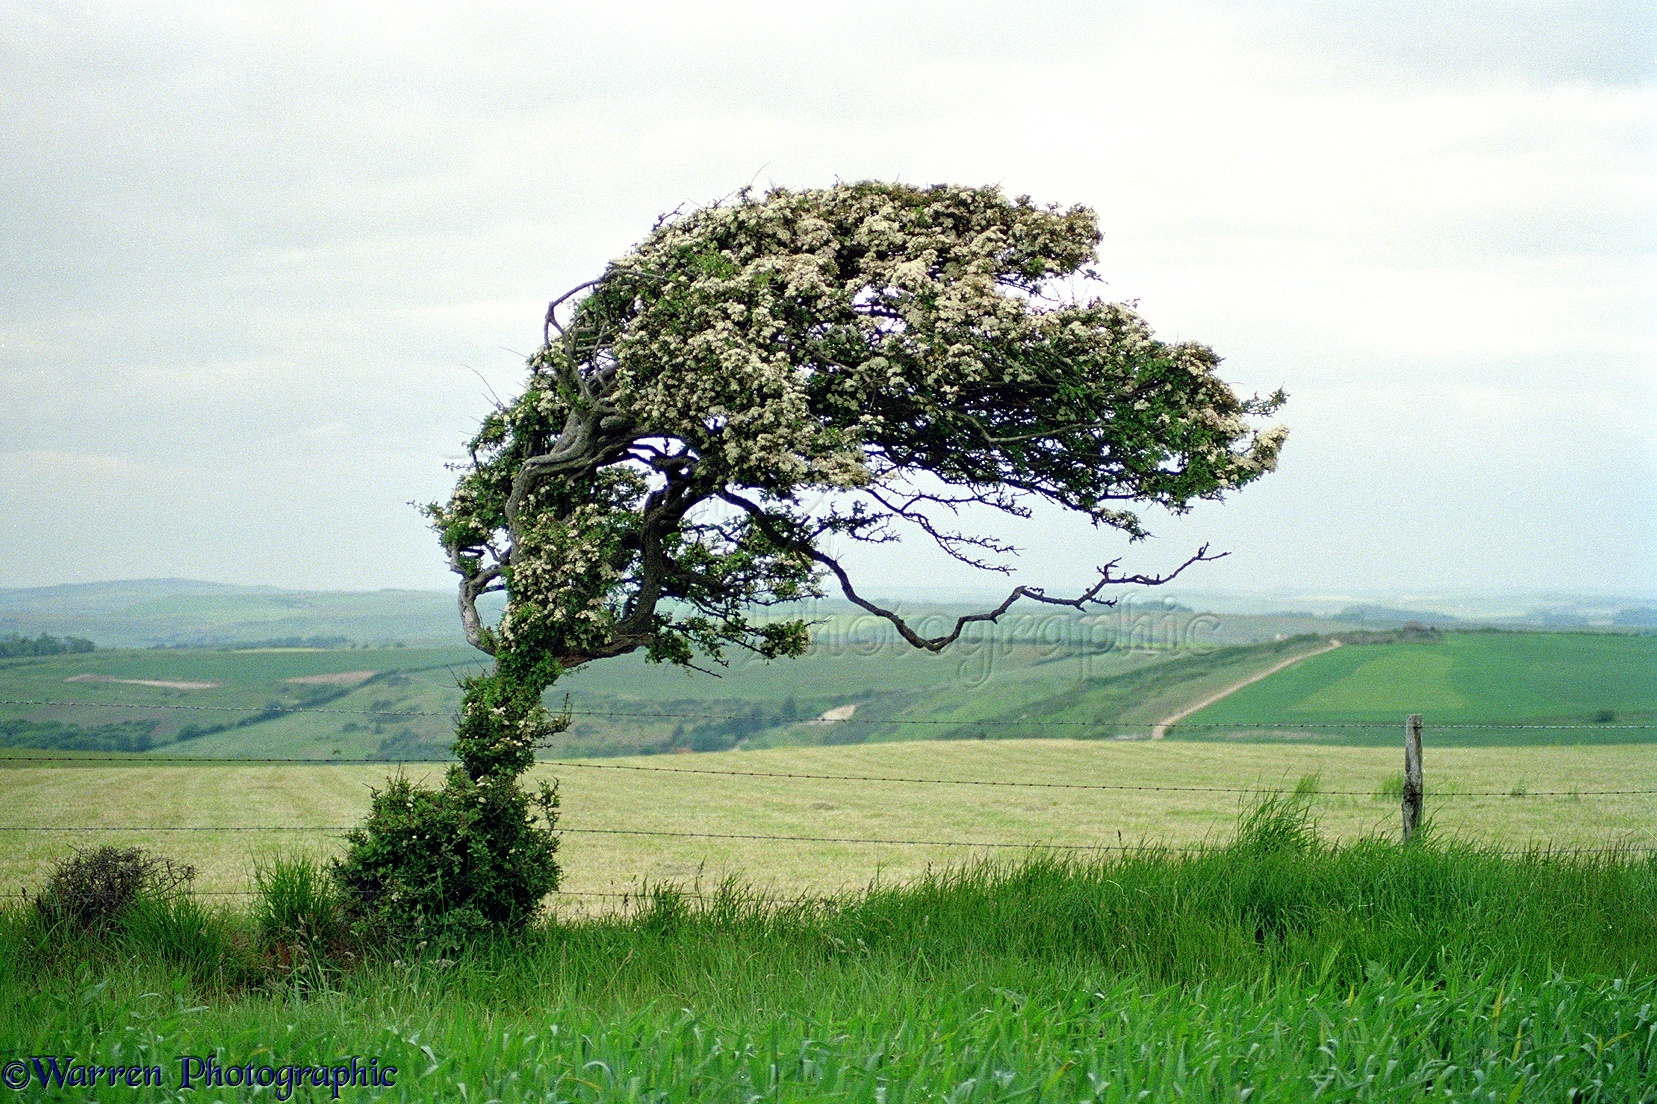 http://www.warrenphotographic.co.uk/photography/bigs/02502-Wind-blown-tree-at-Whitenothe.jpg